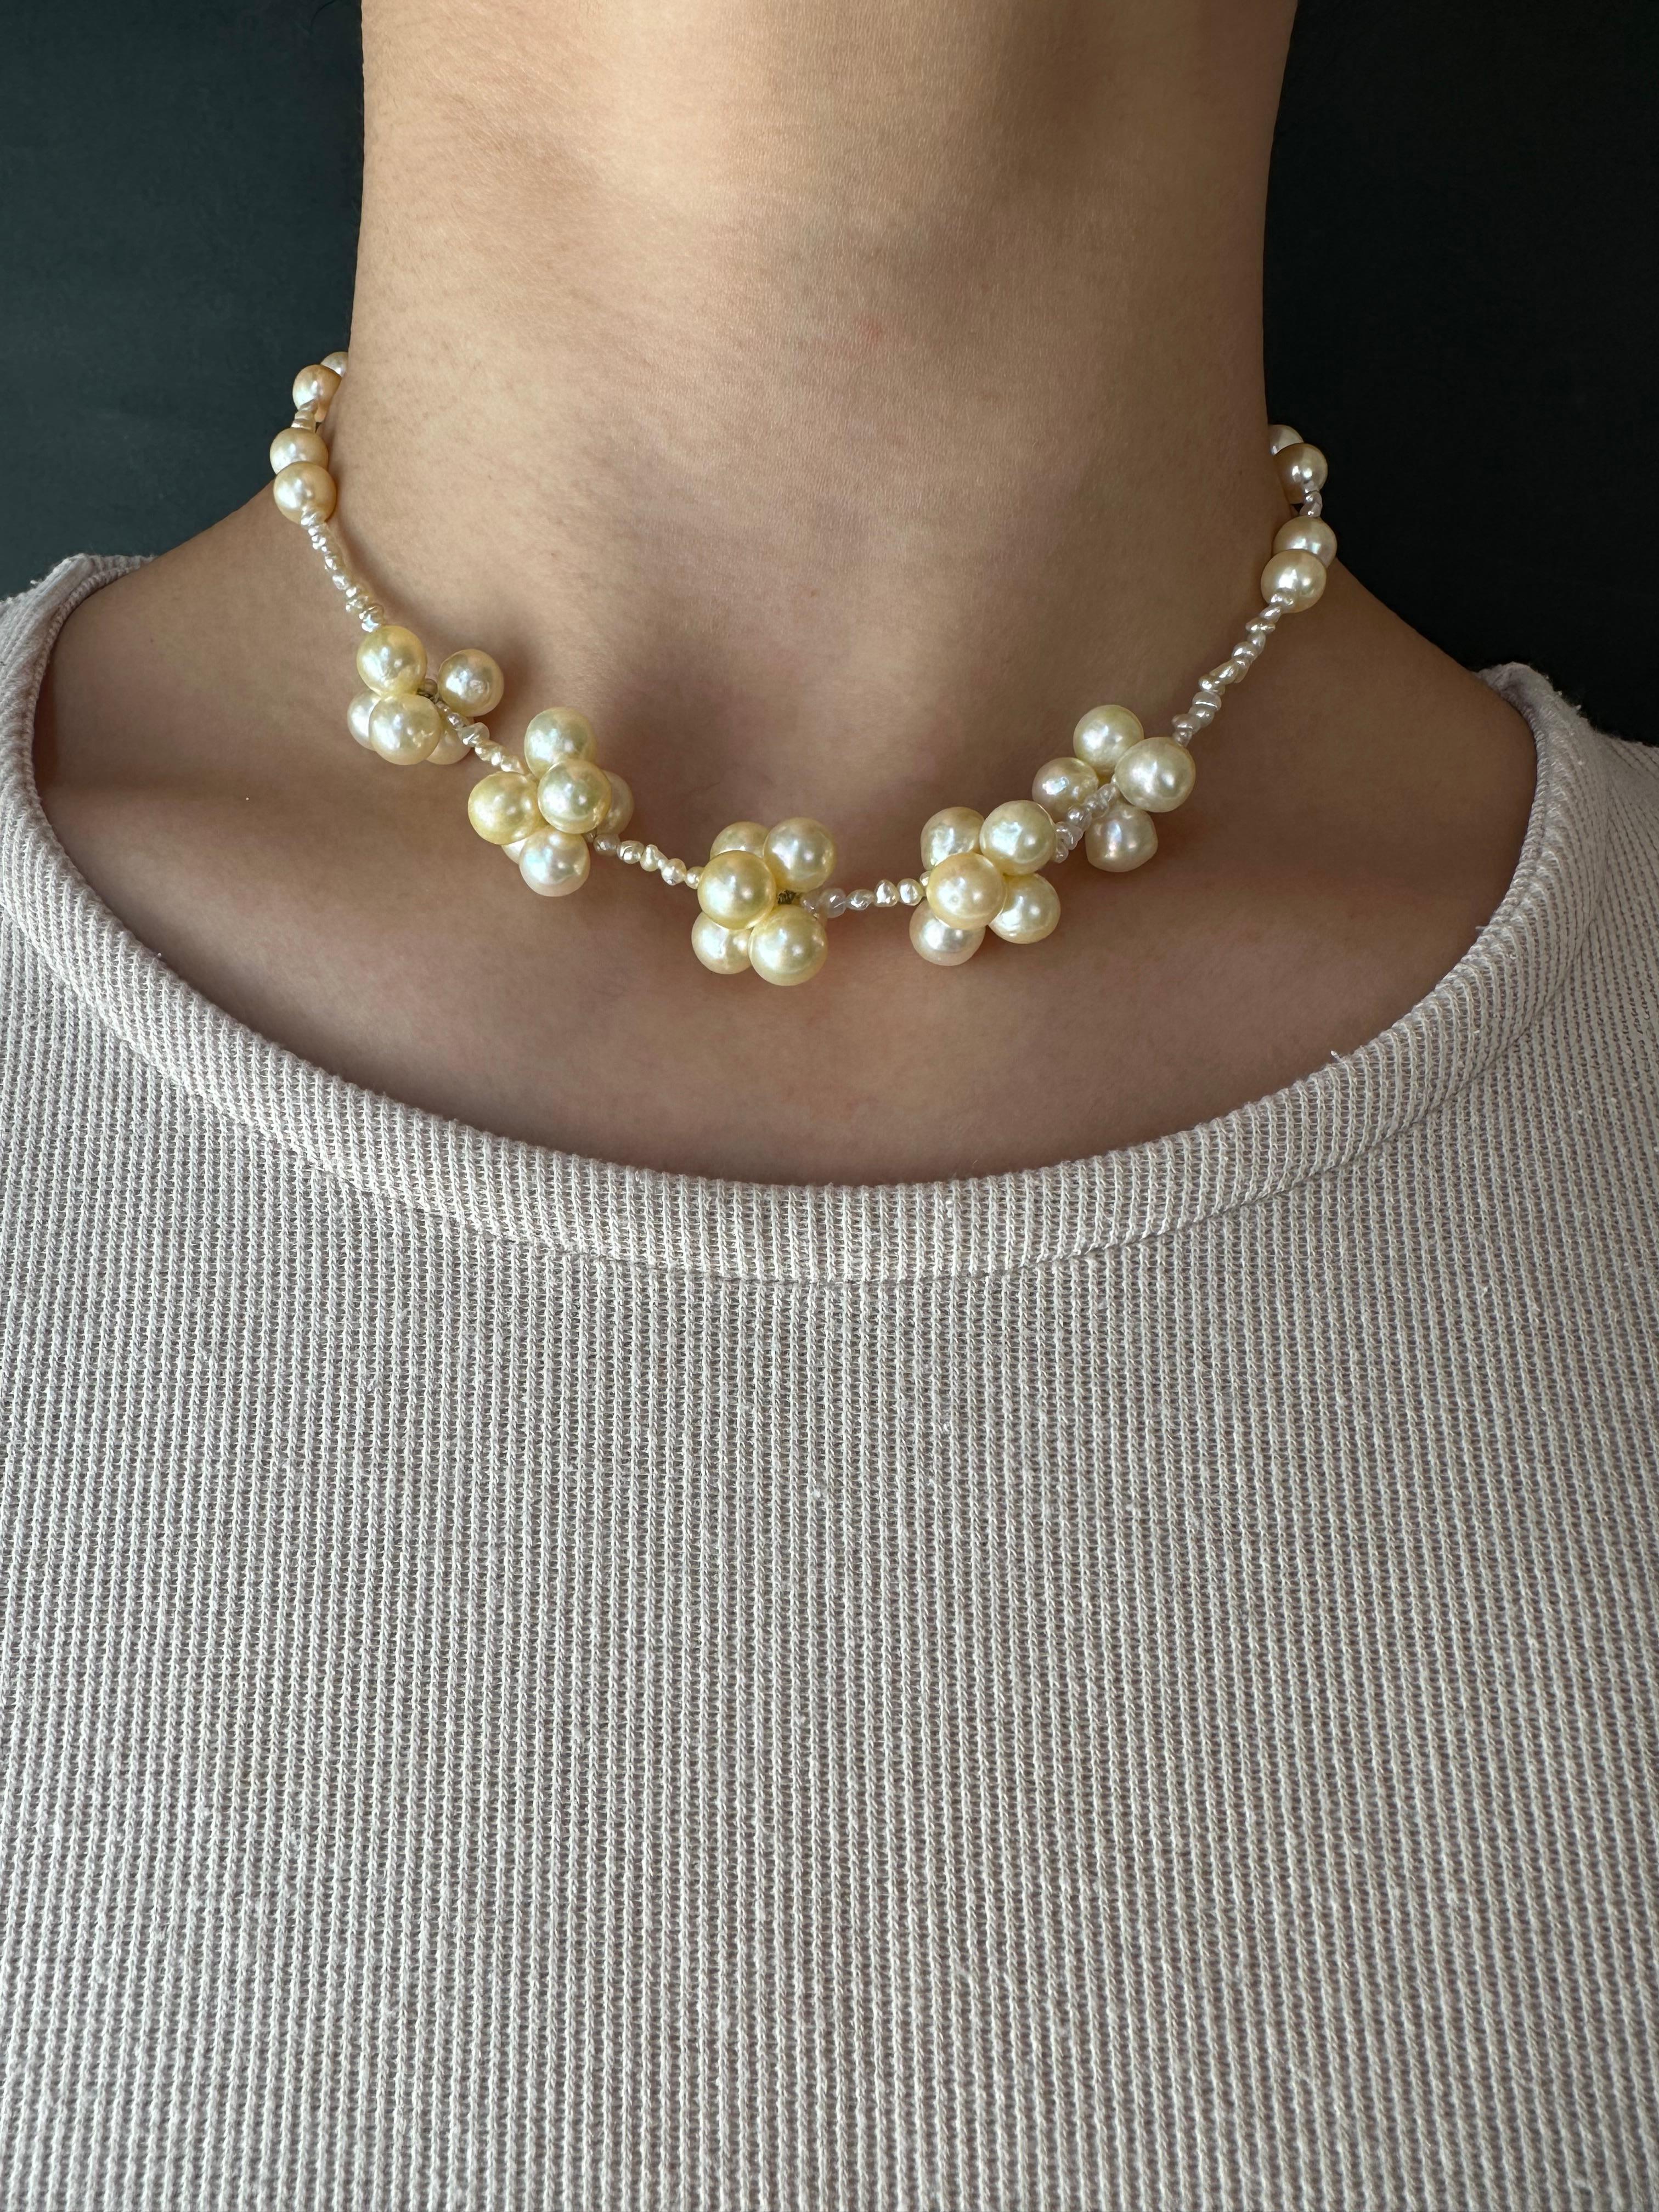 Artisan IRIS PARURE, 7.00mm-8.00mm×36 Akoya Pearl Necklace, Japan Pearl Fringe Necklace For Sale